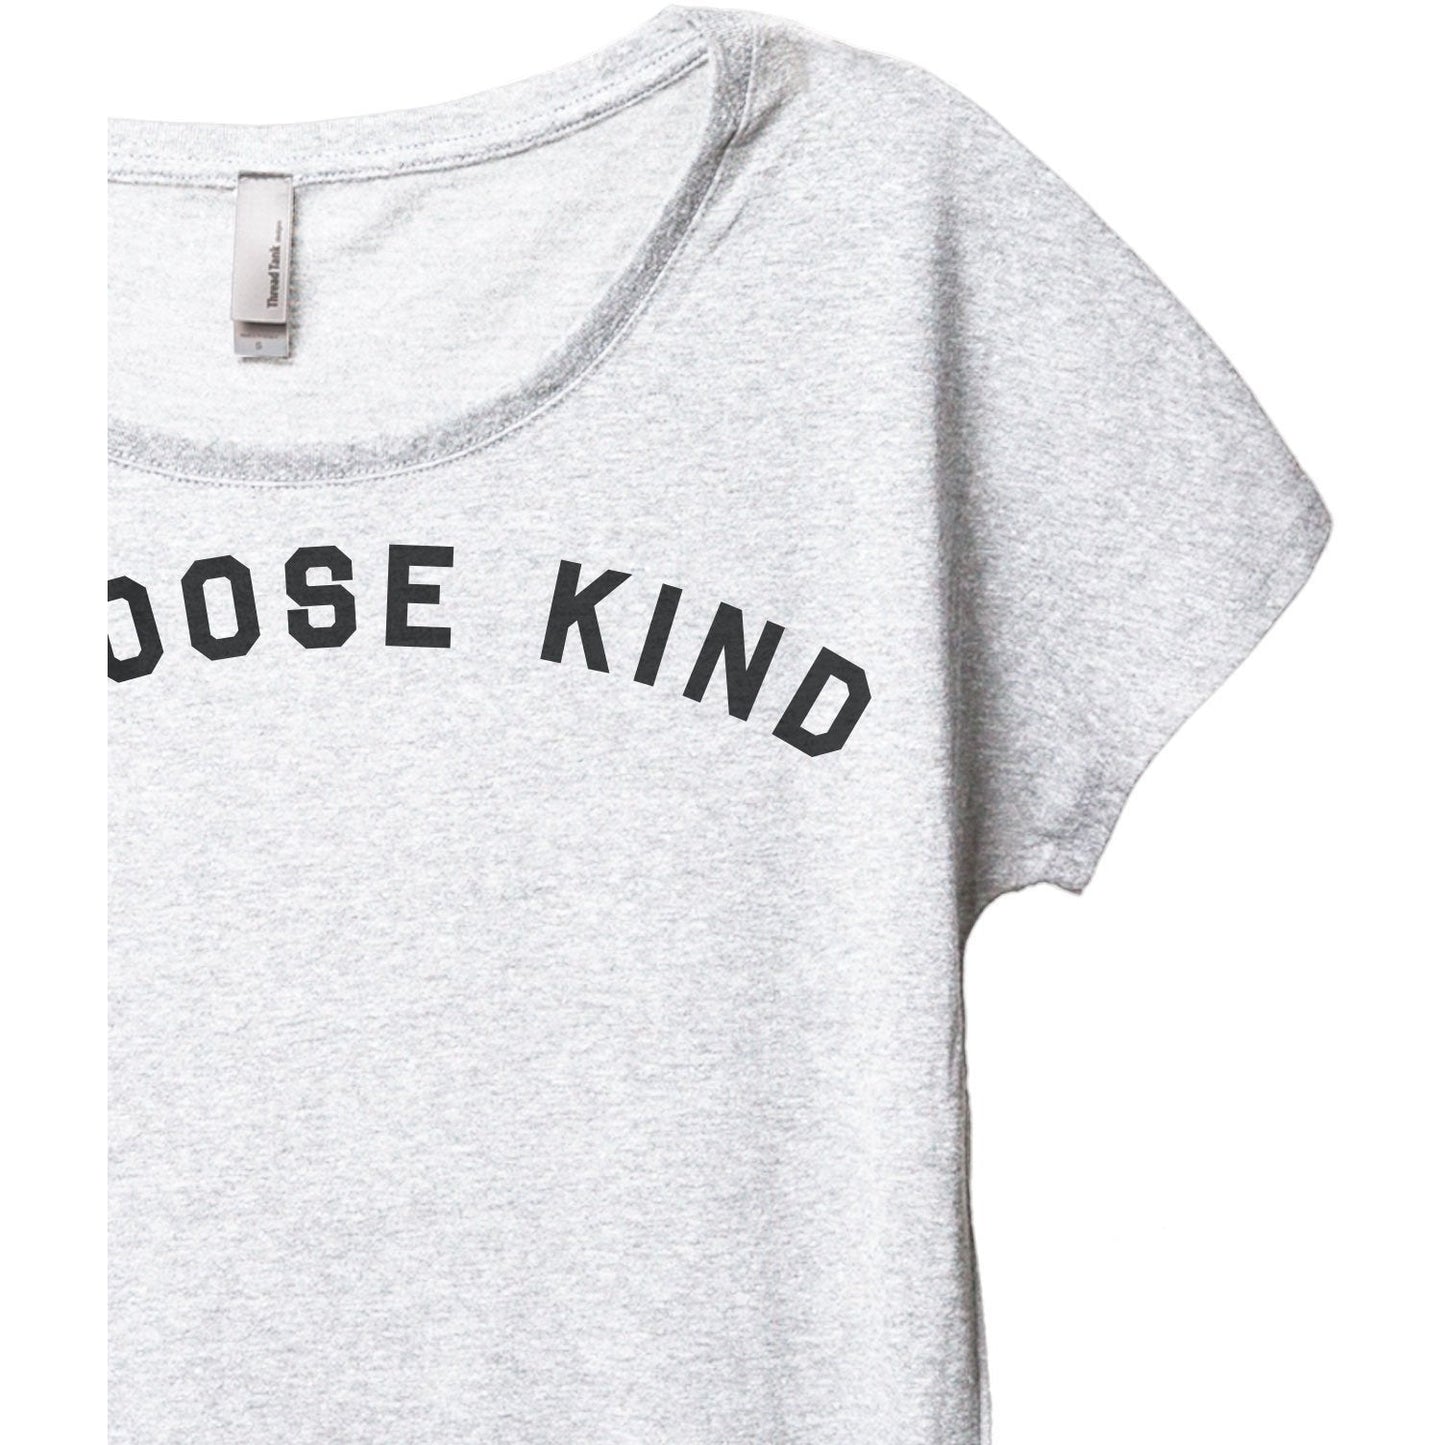 Choose Kind Women's Relaxed Slouchy Dolman T-Shirt Tee Heather White Closeup Details
